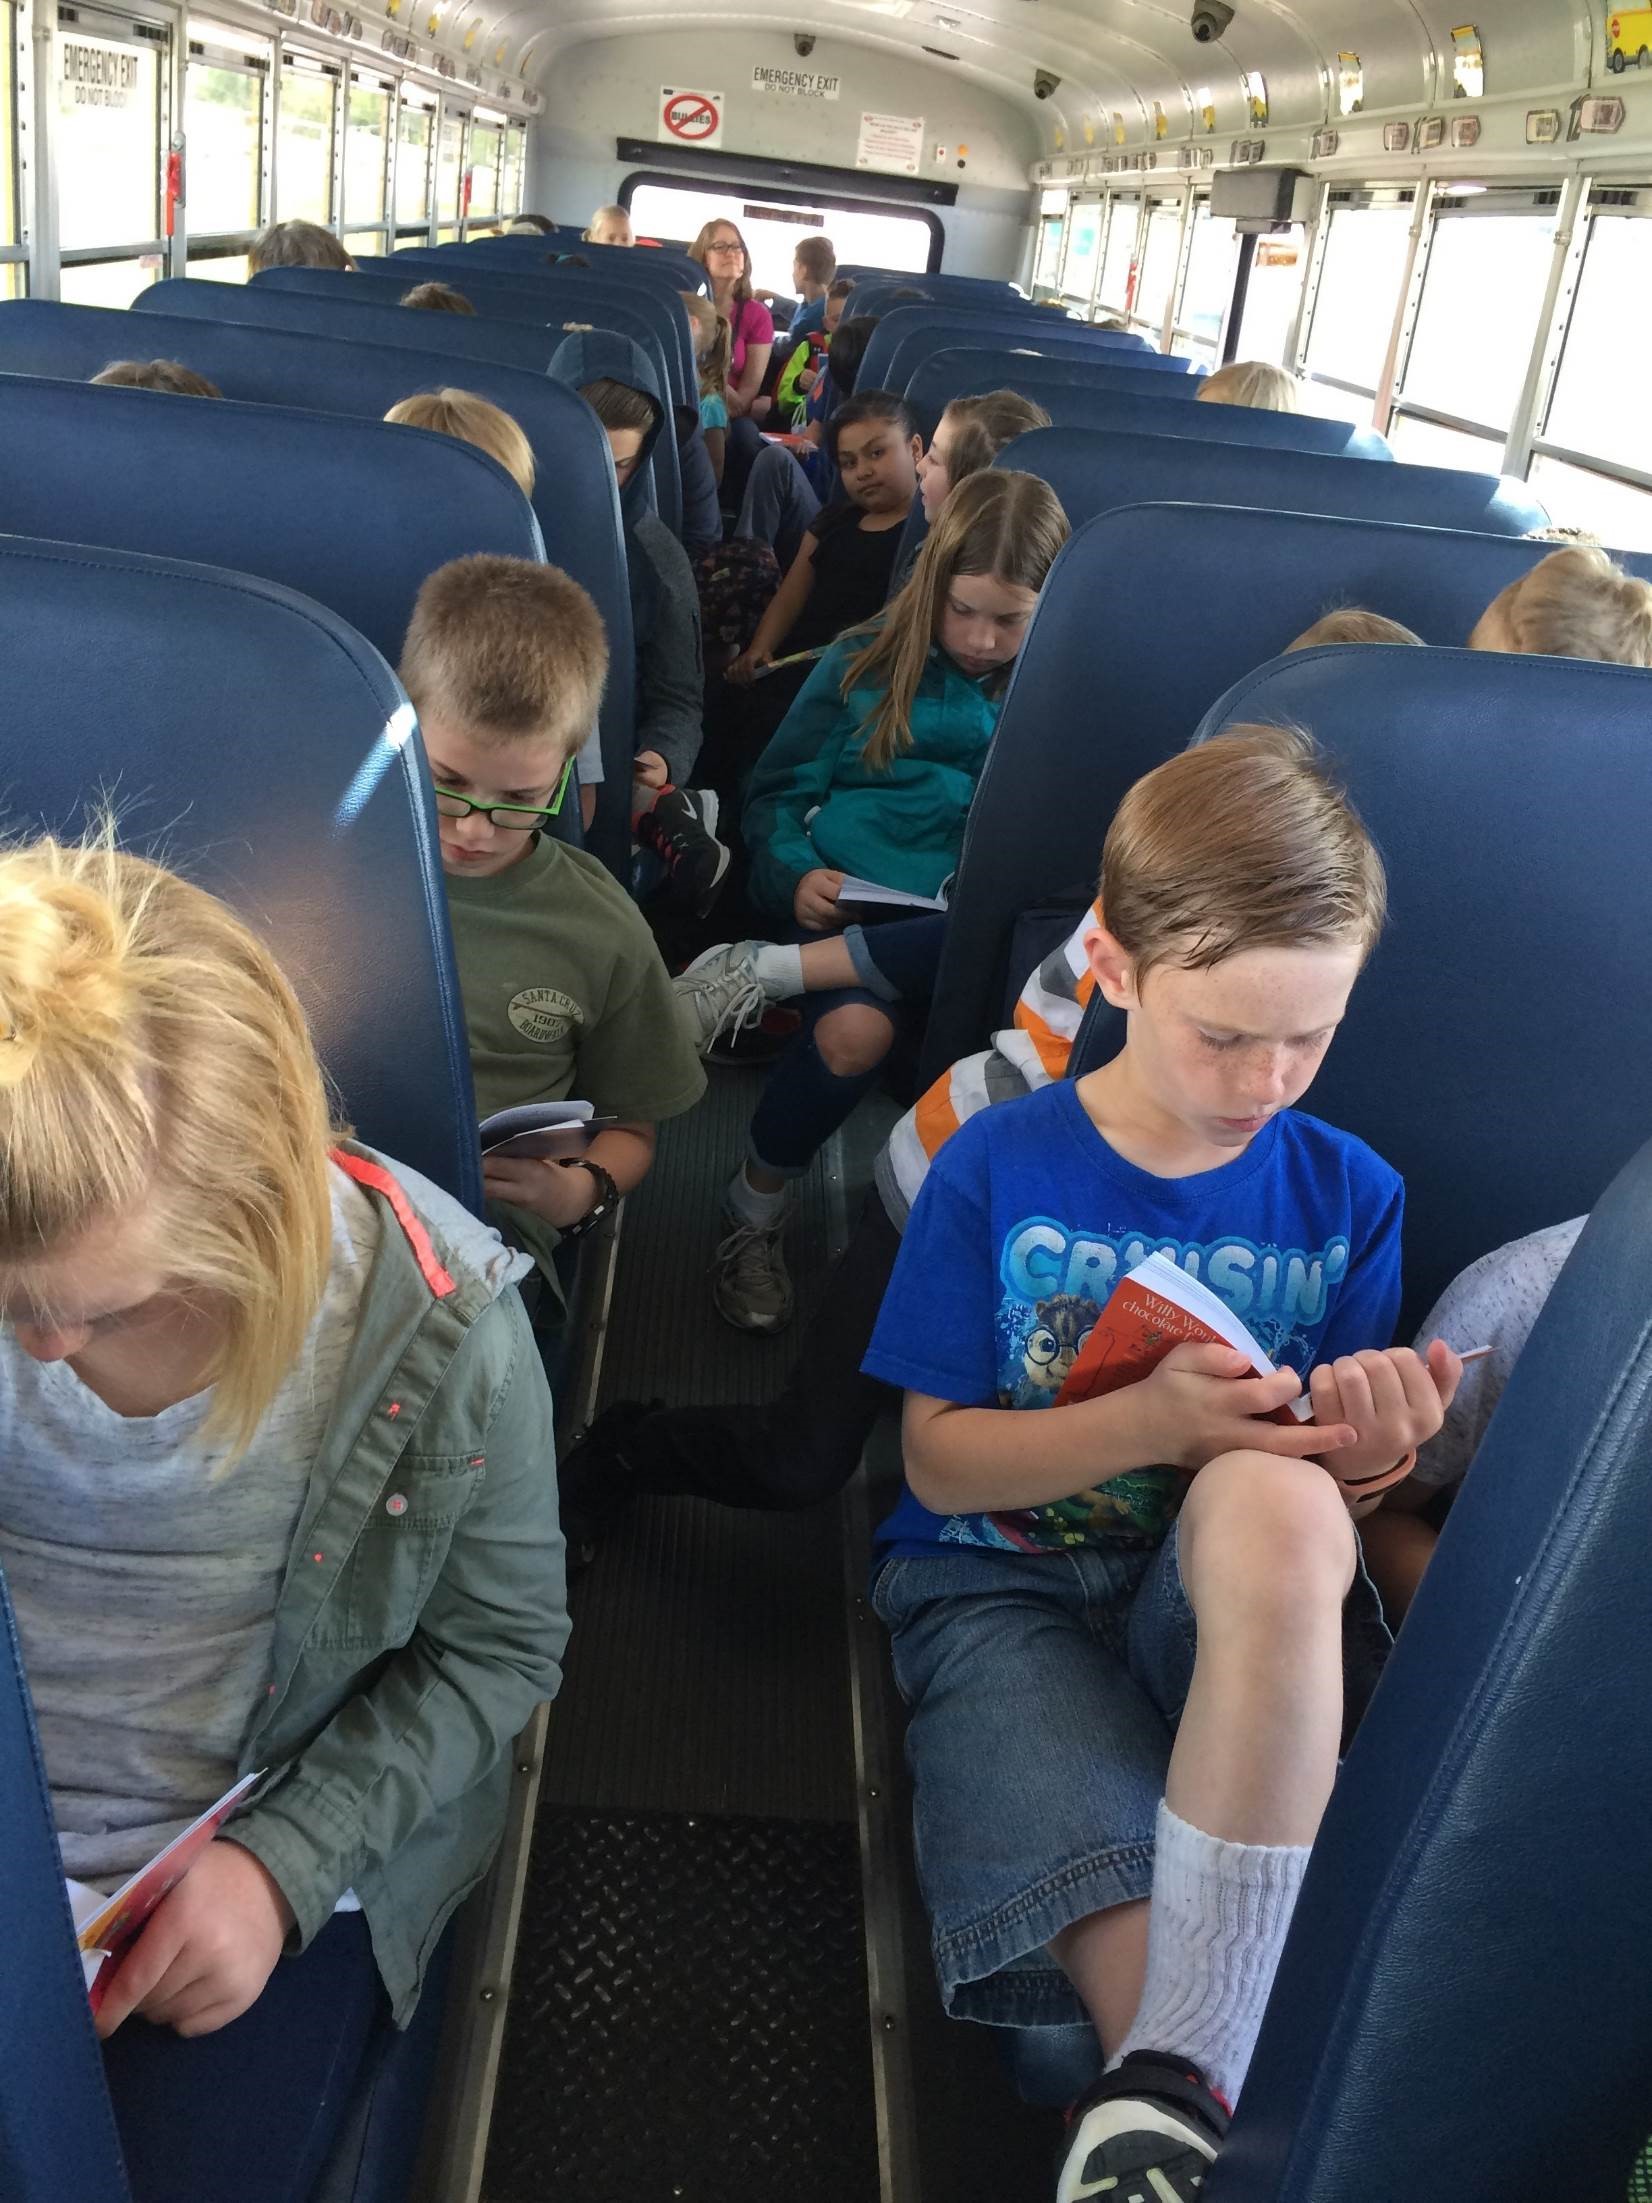 Students reading on the bus